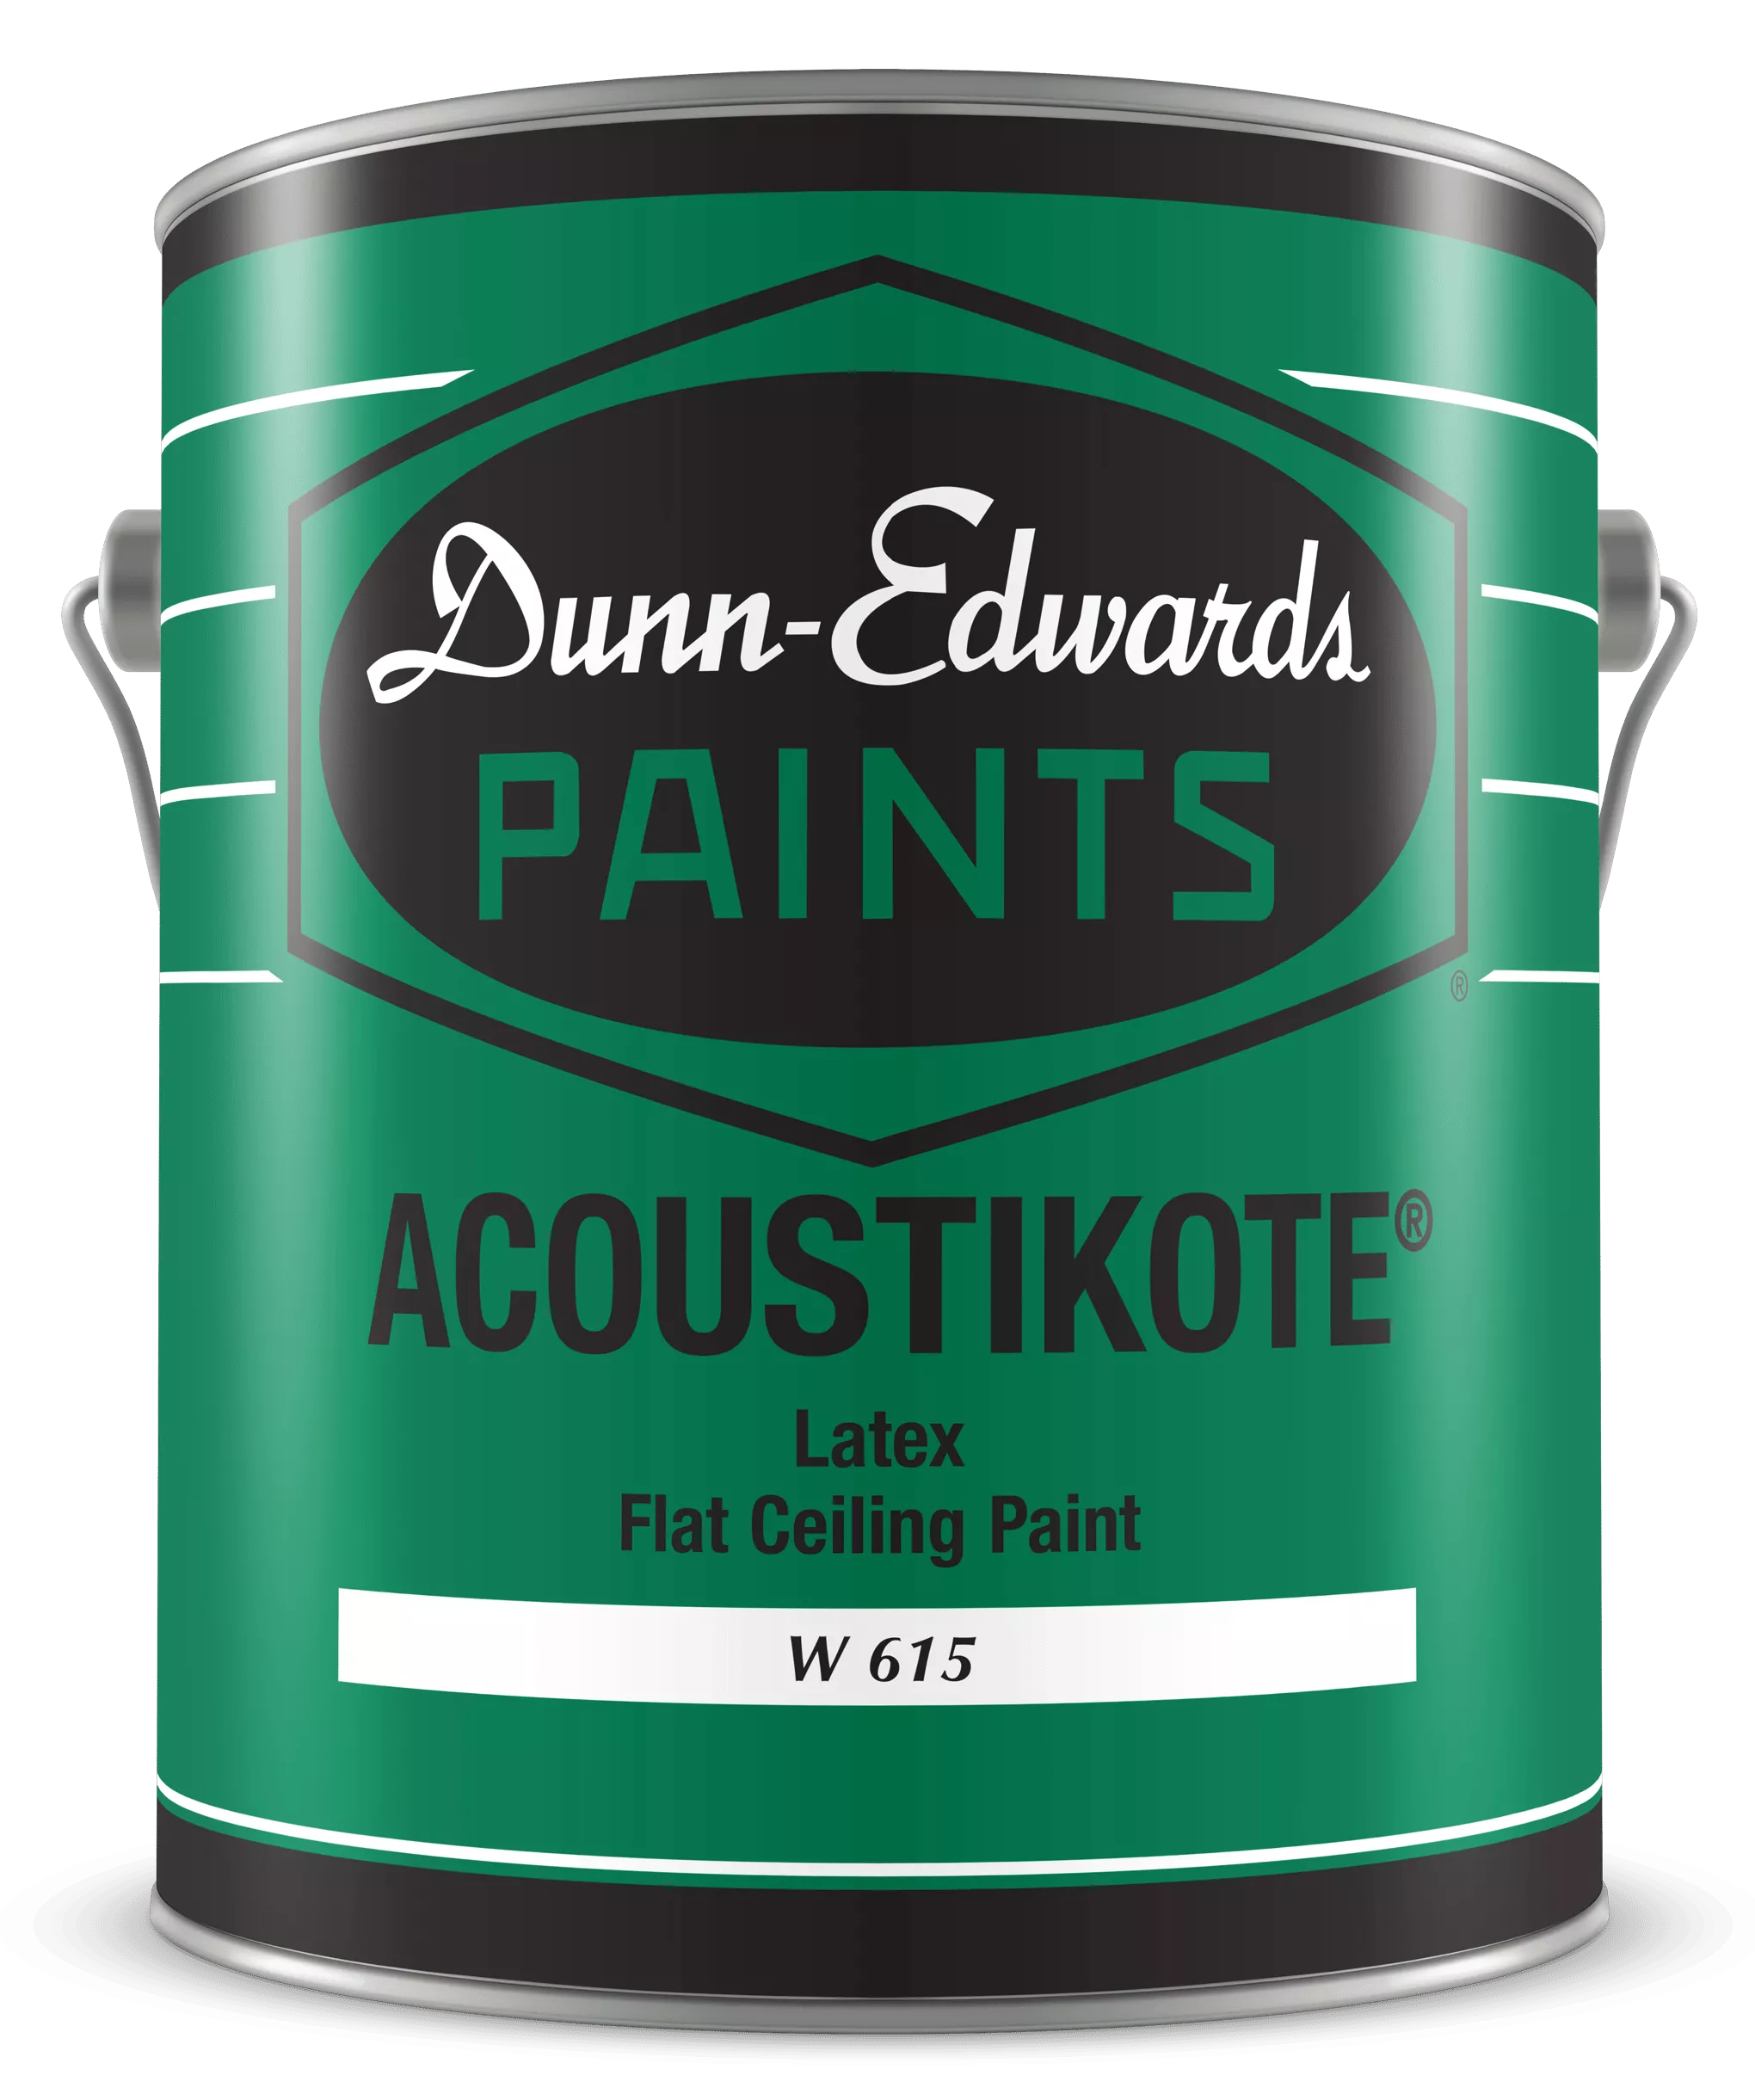 ACOUSTIKOTE Latex Flat Ceiling Paint Can